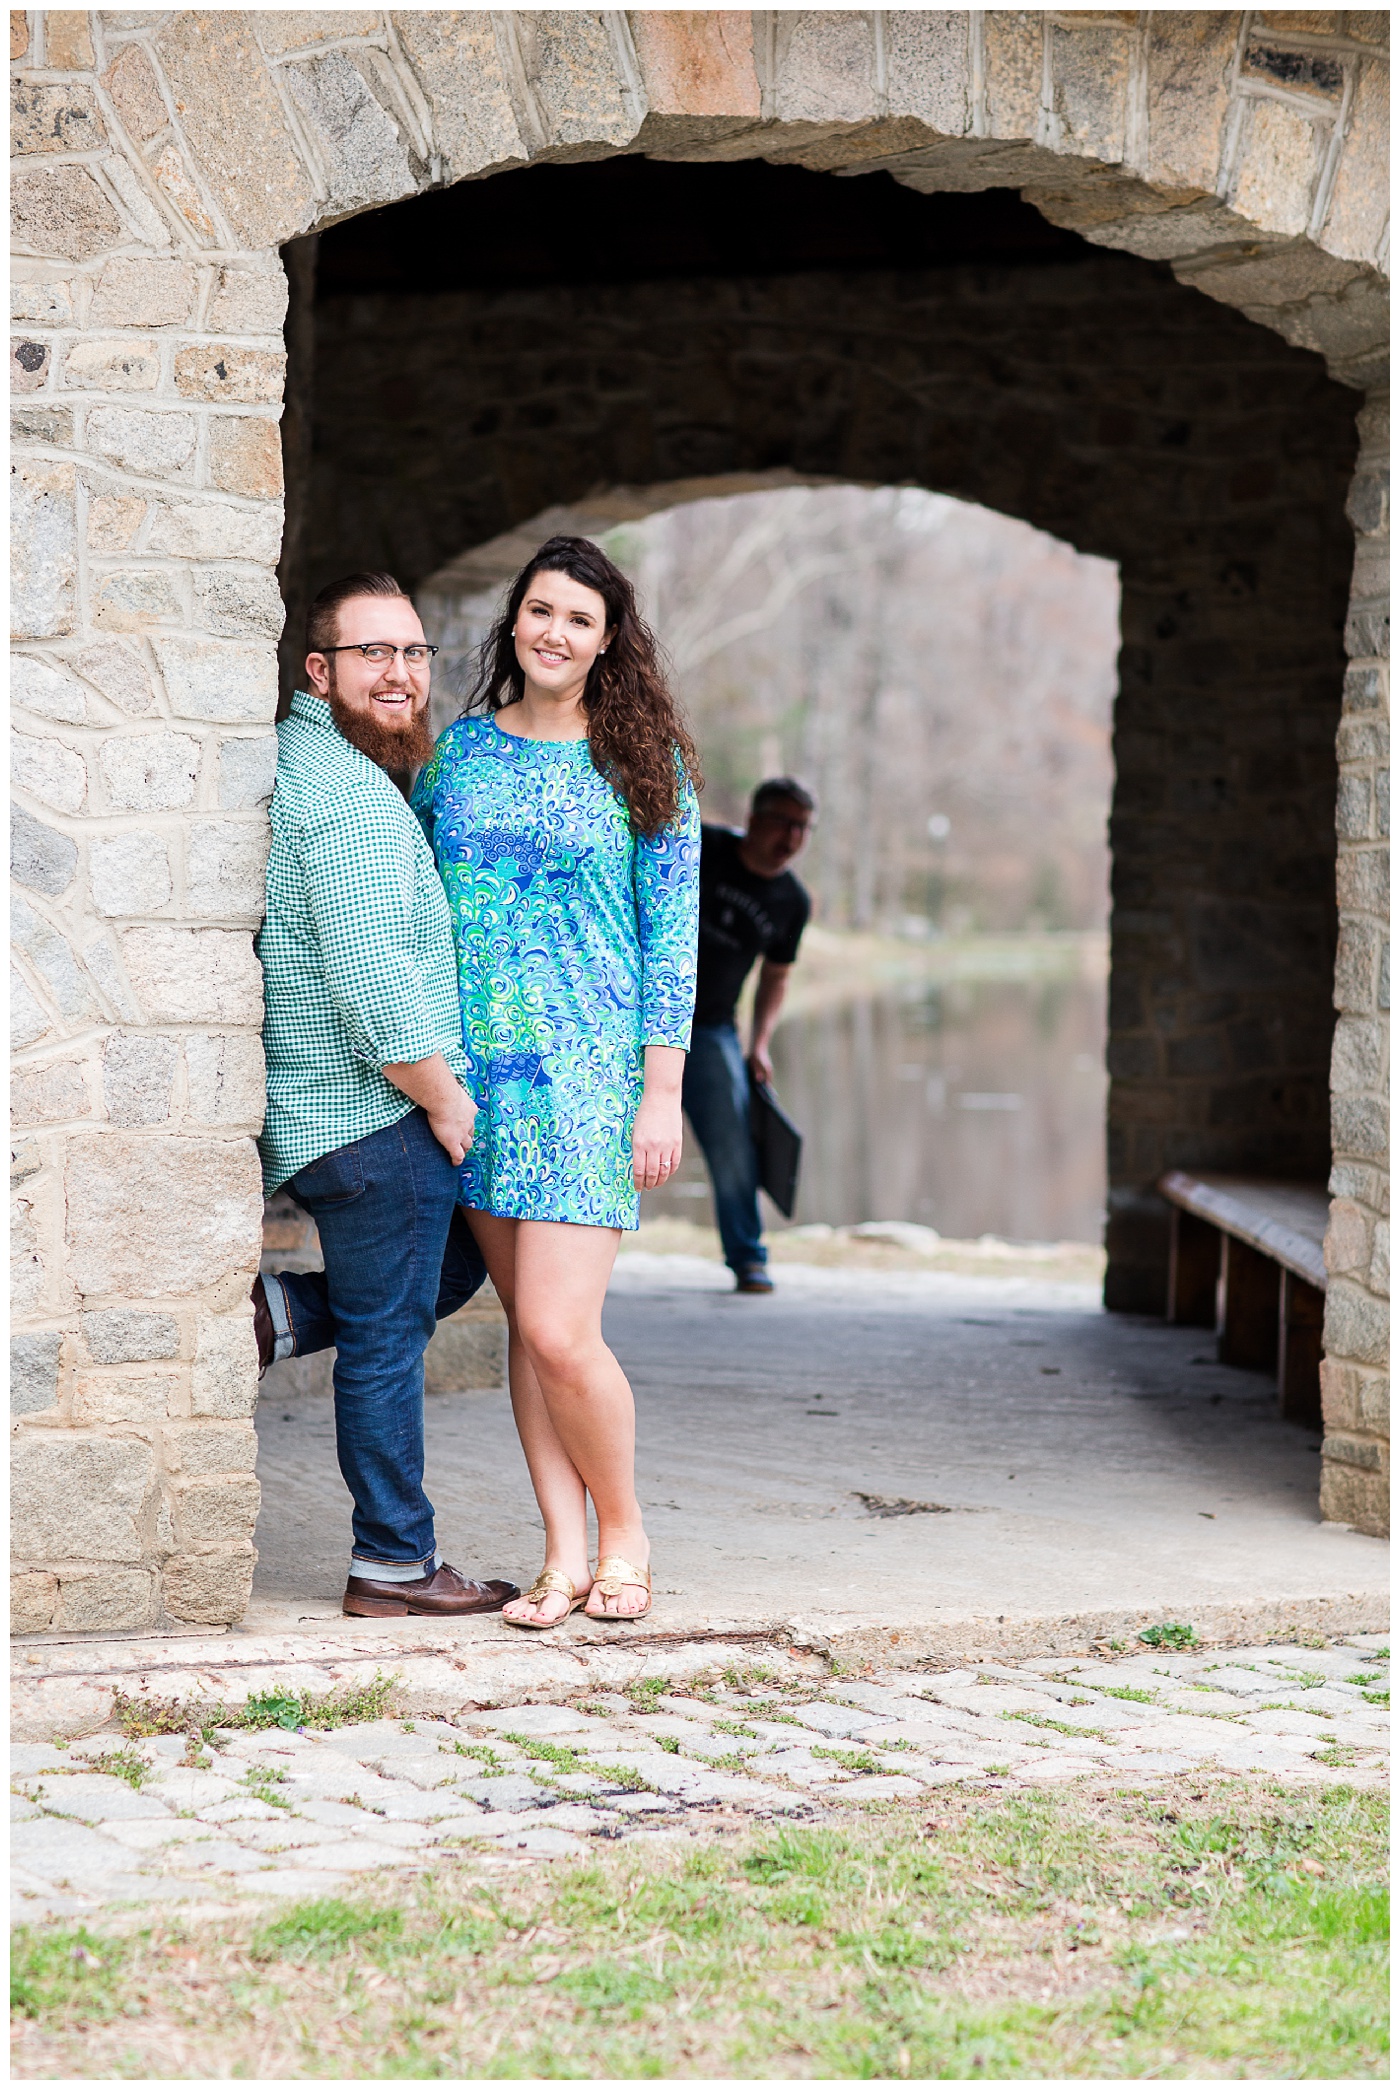 Leigh Skaggs Photography | Behind the Scenes: Assistants